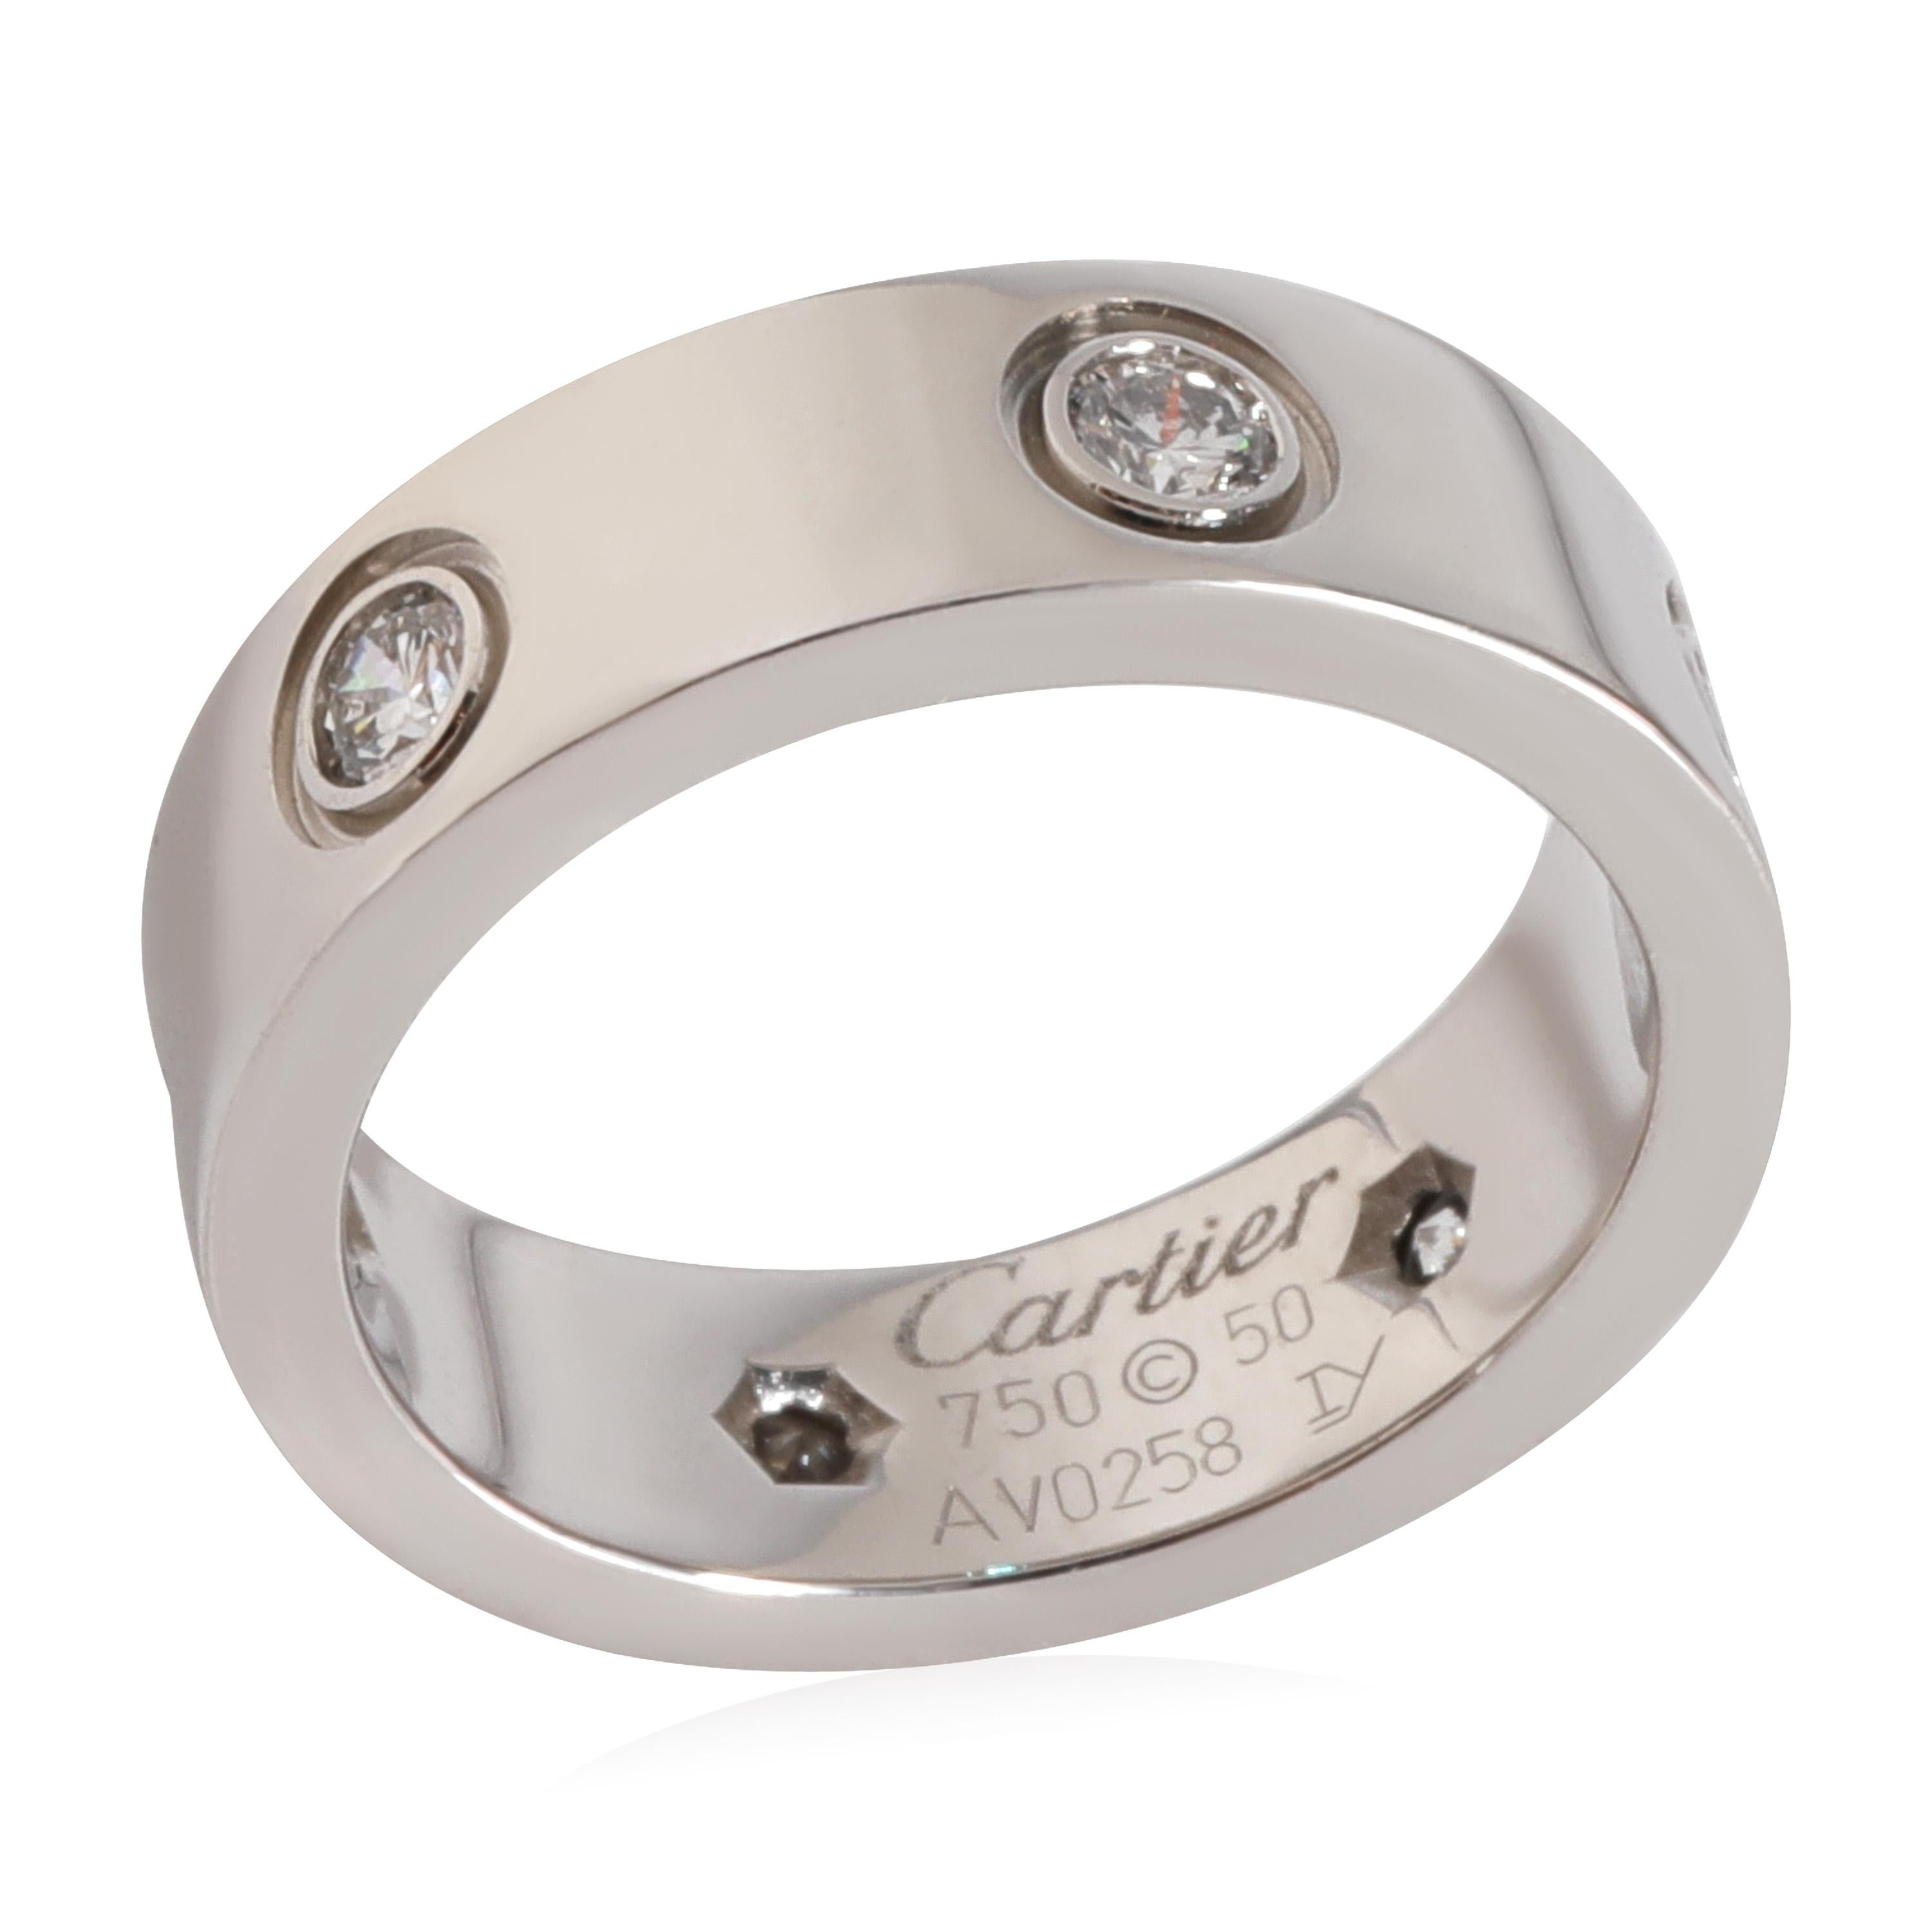 Cartier Love Diamond Wedding Band in 18k White Gold 0.46 CTW

PRIMARY DETAILS
SKU: 123191
Listing Title: Cartier Love Diamond Wedding Band in 18k White Gold 0.46 CTW
Condition Description: Retails for 6000 USD. In excellent condition. Ring size is